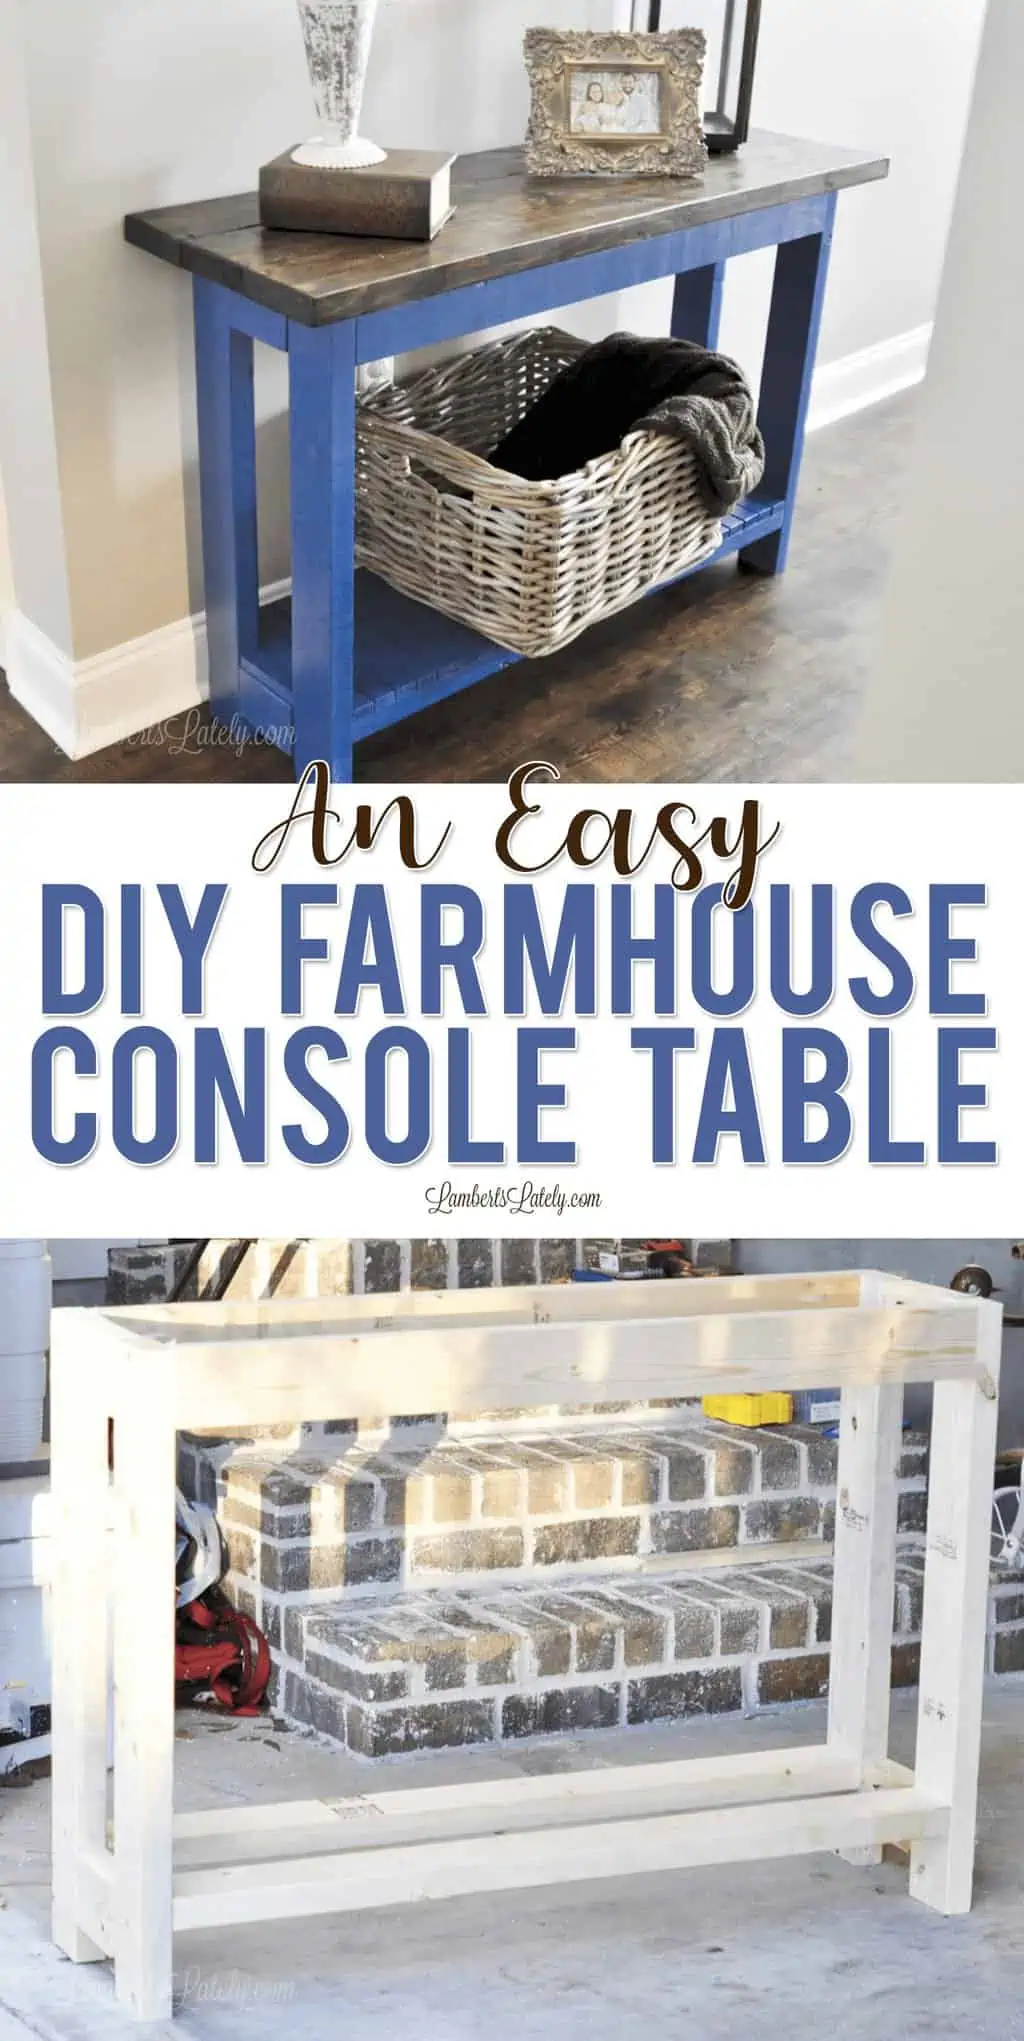 Find easy plans for a DIY farmhouse console table in this post, complete with ways to style an entry table.